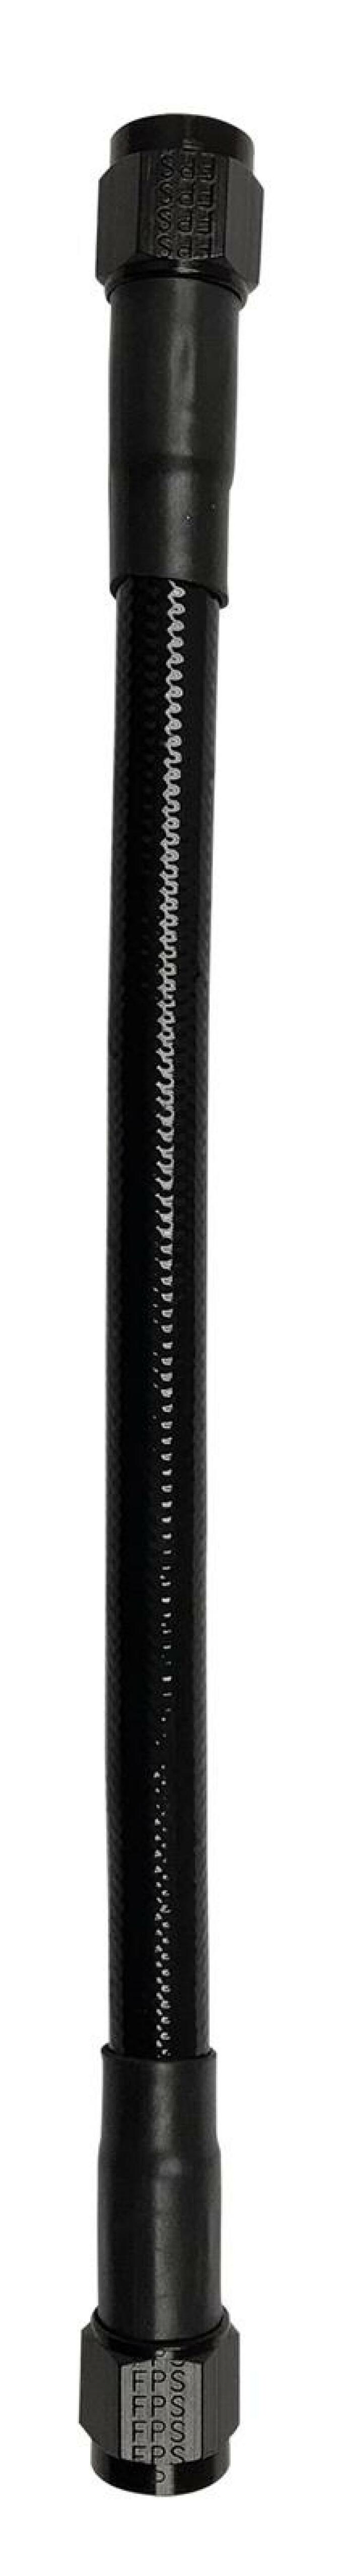 Fragola -6AN Ext Black PTFE Hose Assembly Straight x Straight 48in - 6026-1-1-48BL